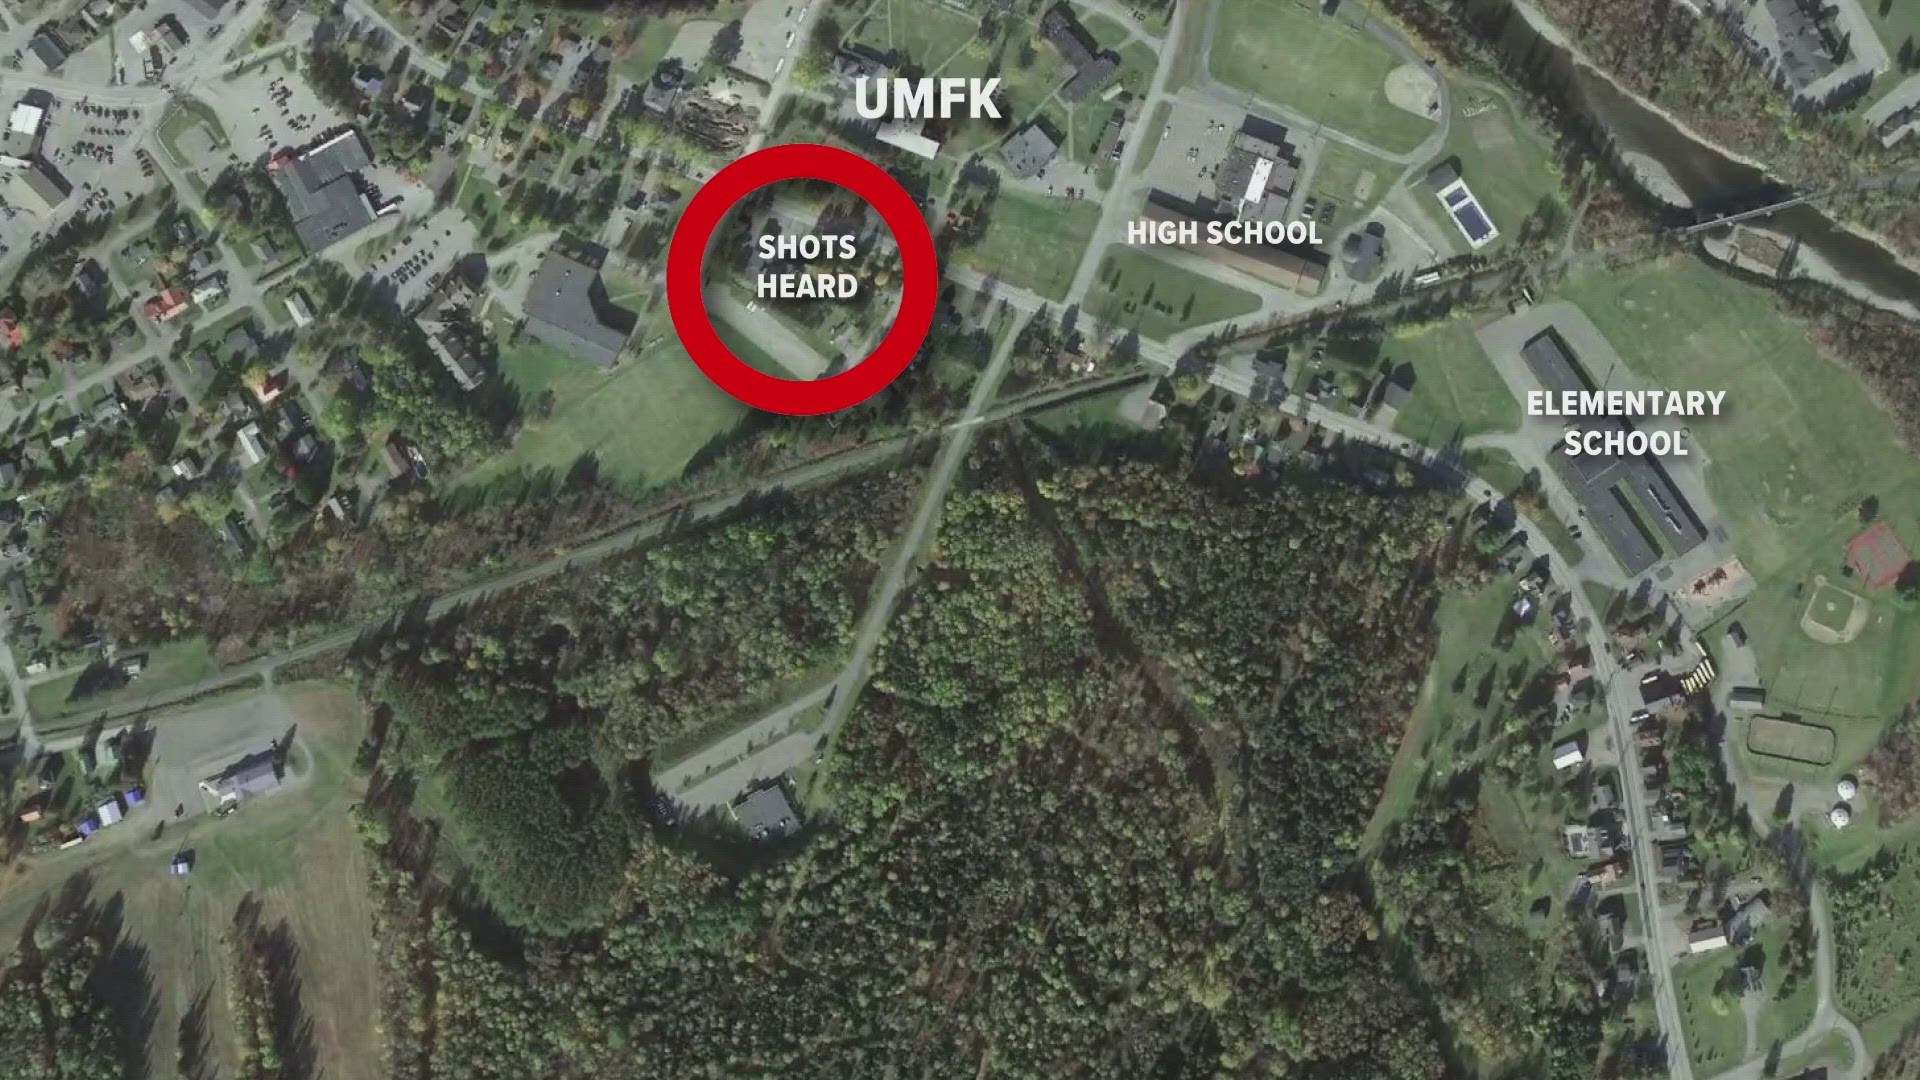 Multiple gunshots were fired near the University of Maine at Fort Kent campus, as well as near the high school and elementary school.